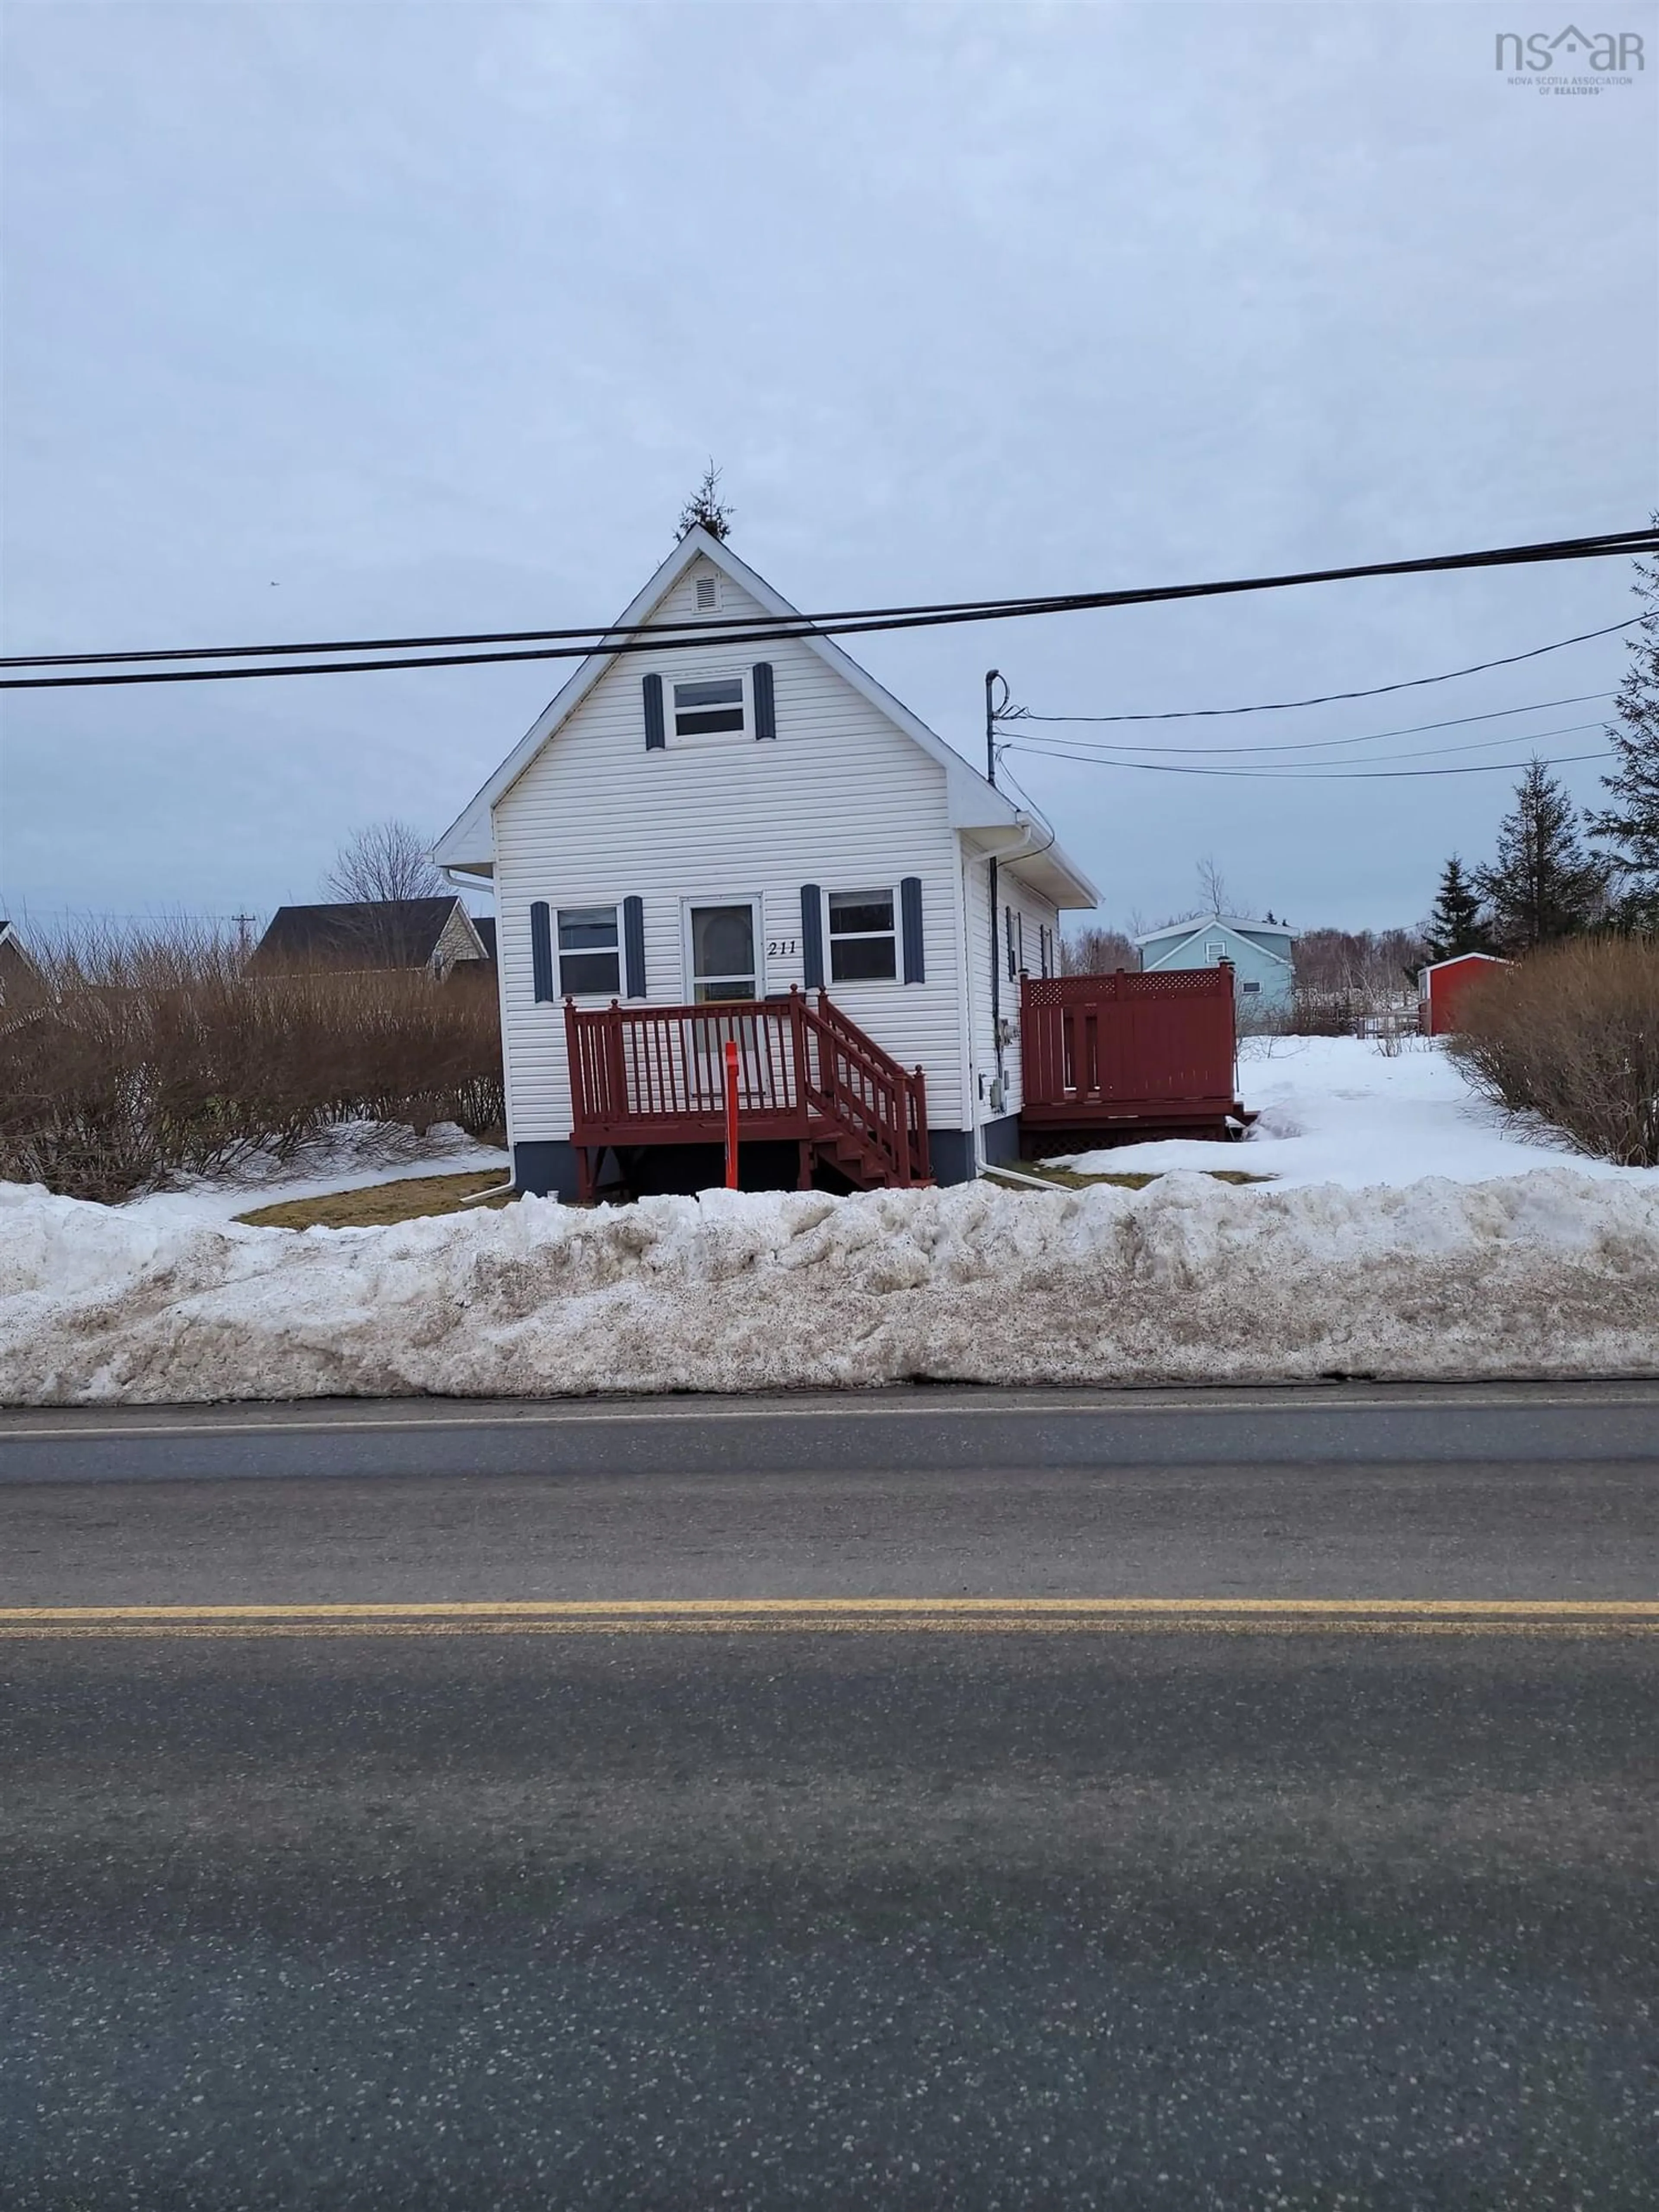 Home with unknown exterior material for 211 213 Brookside St, Glace Bay Nova Scotia B1A 1L7